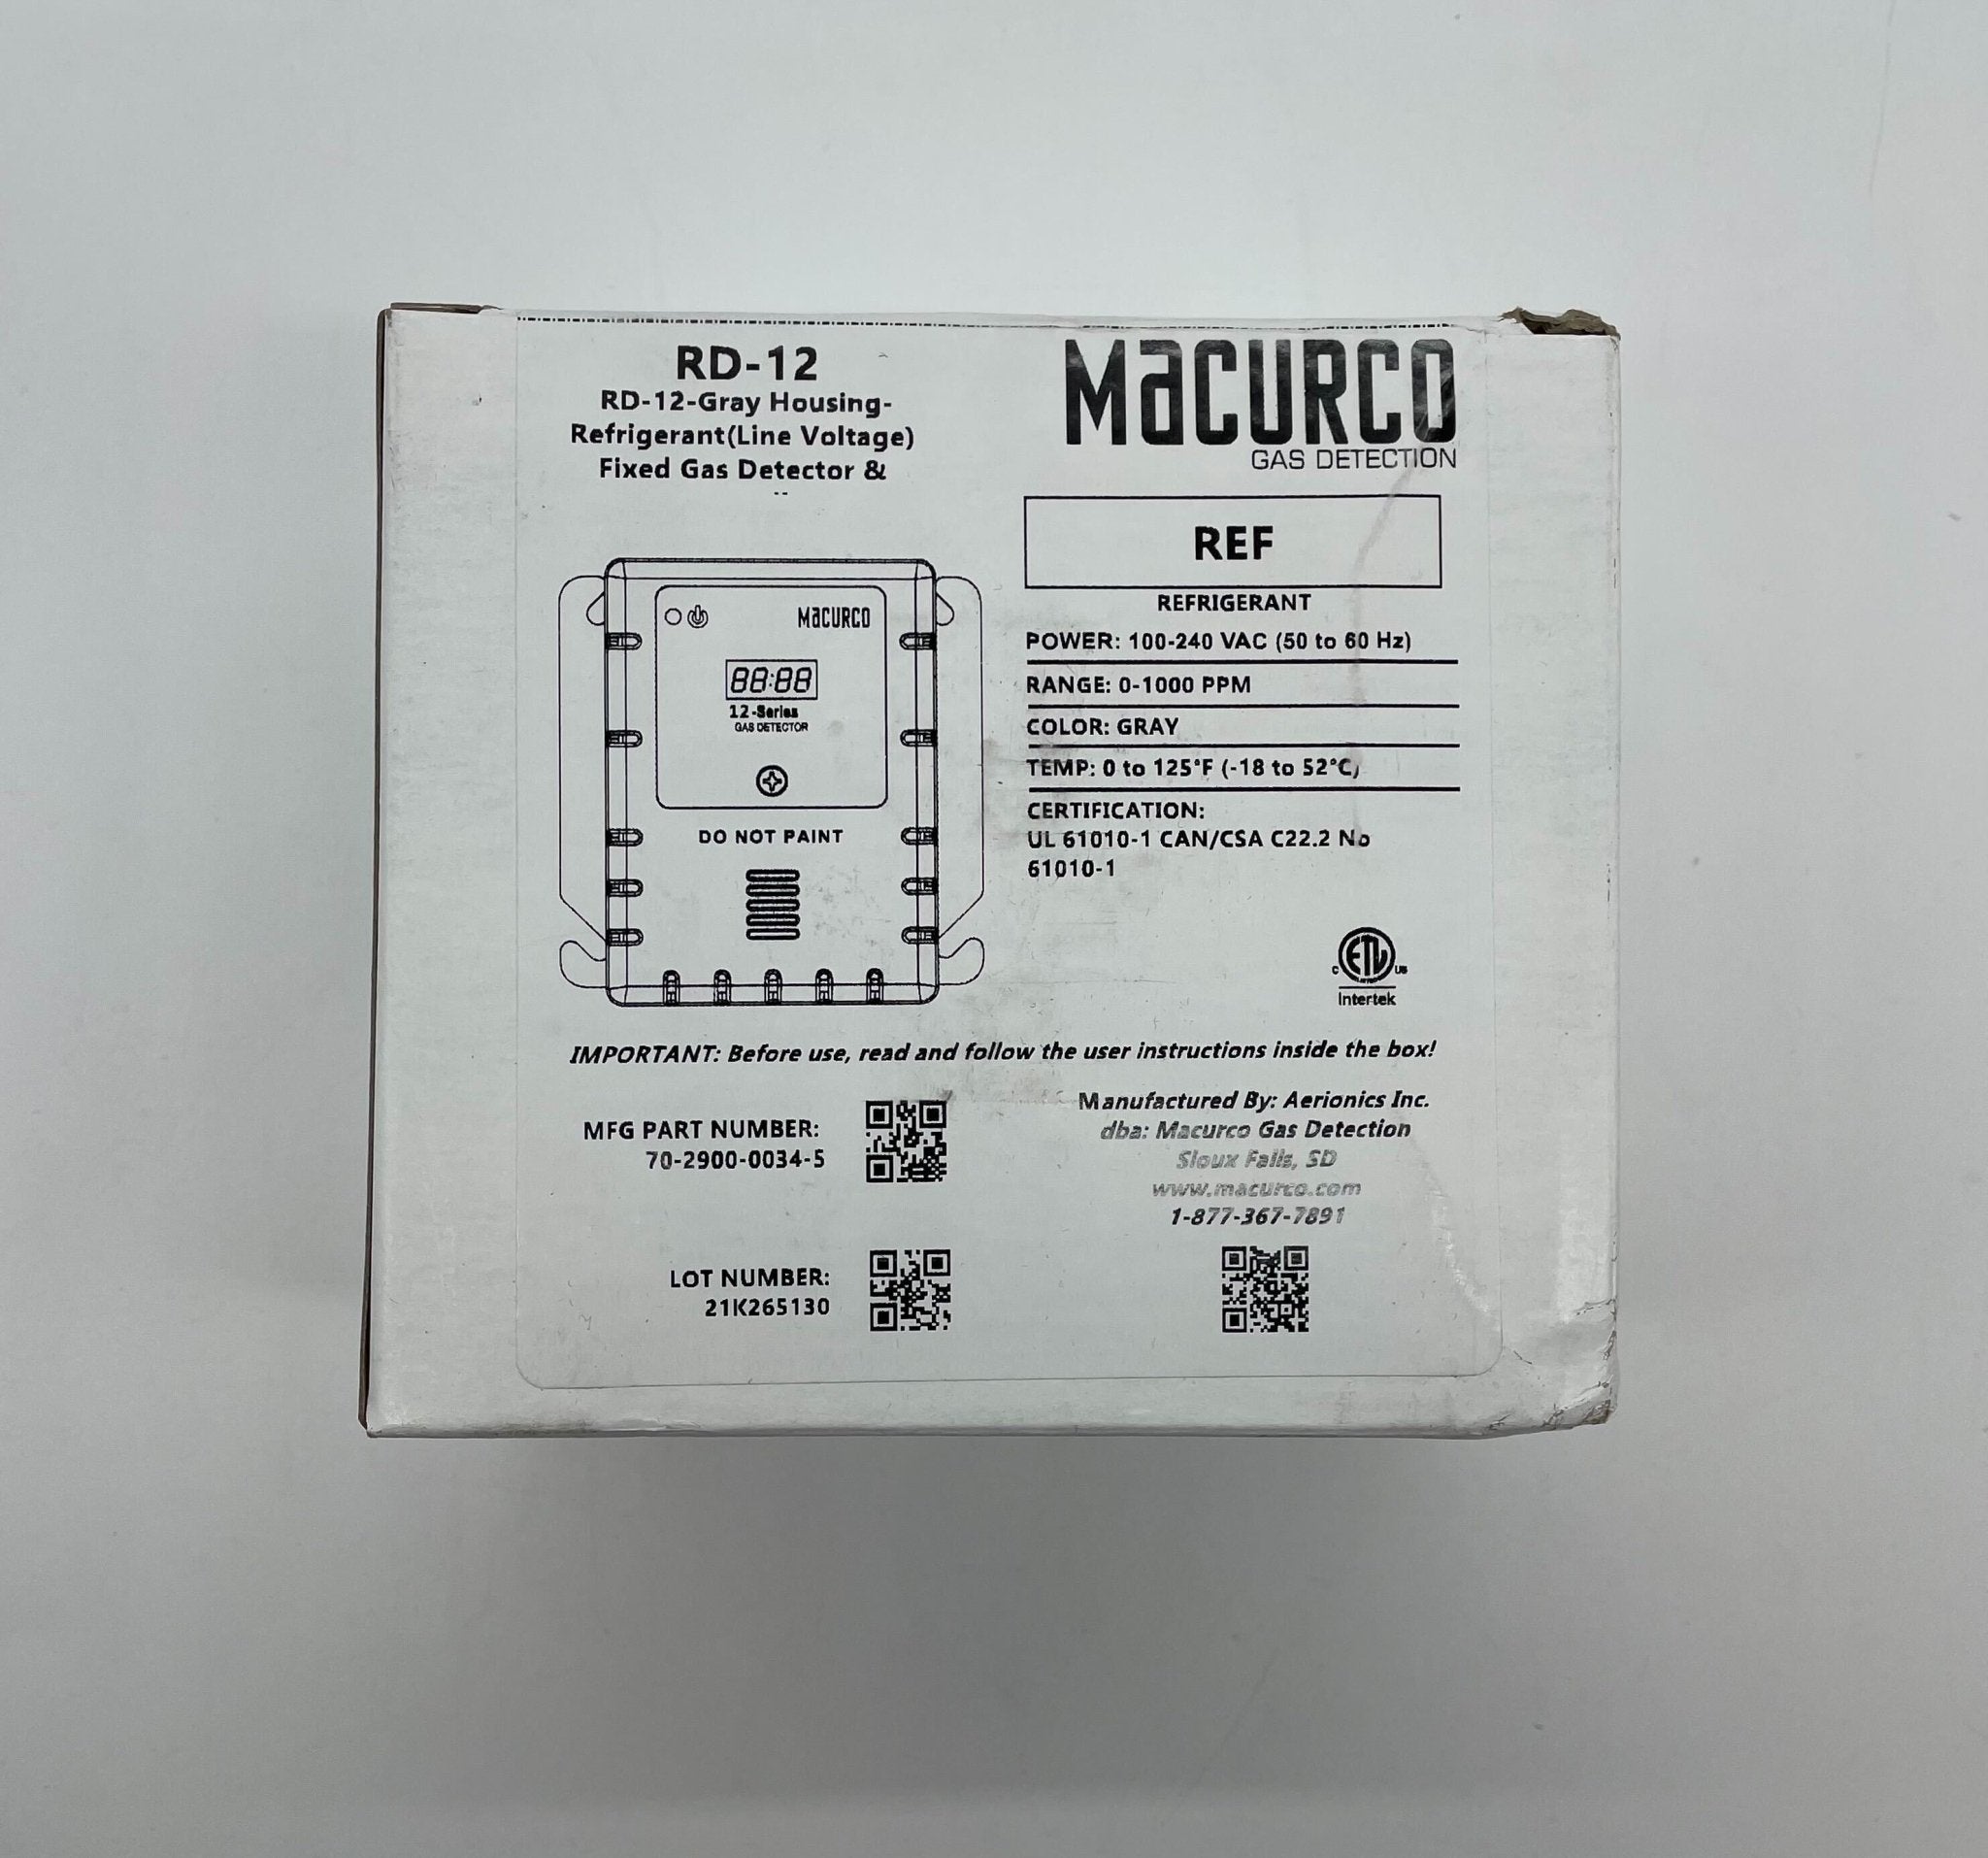 Macurco RD-12 Gas Detector Controller Transducer - The Fire Alarm Supplier